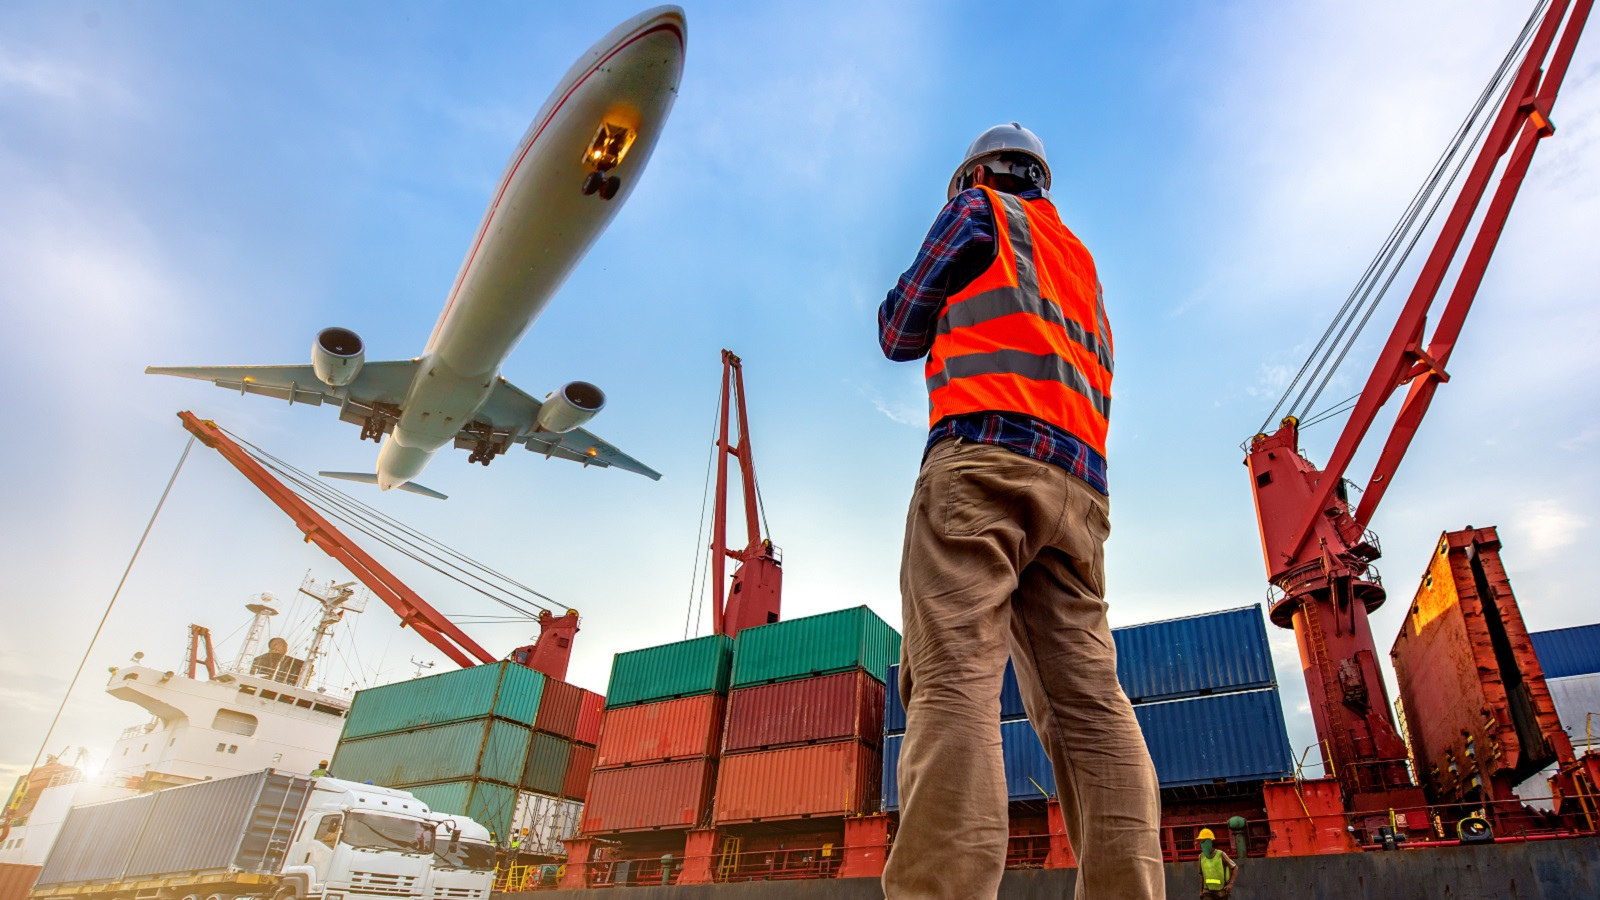 Career in Logistics: What Skills Employers Are Looking For